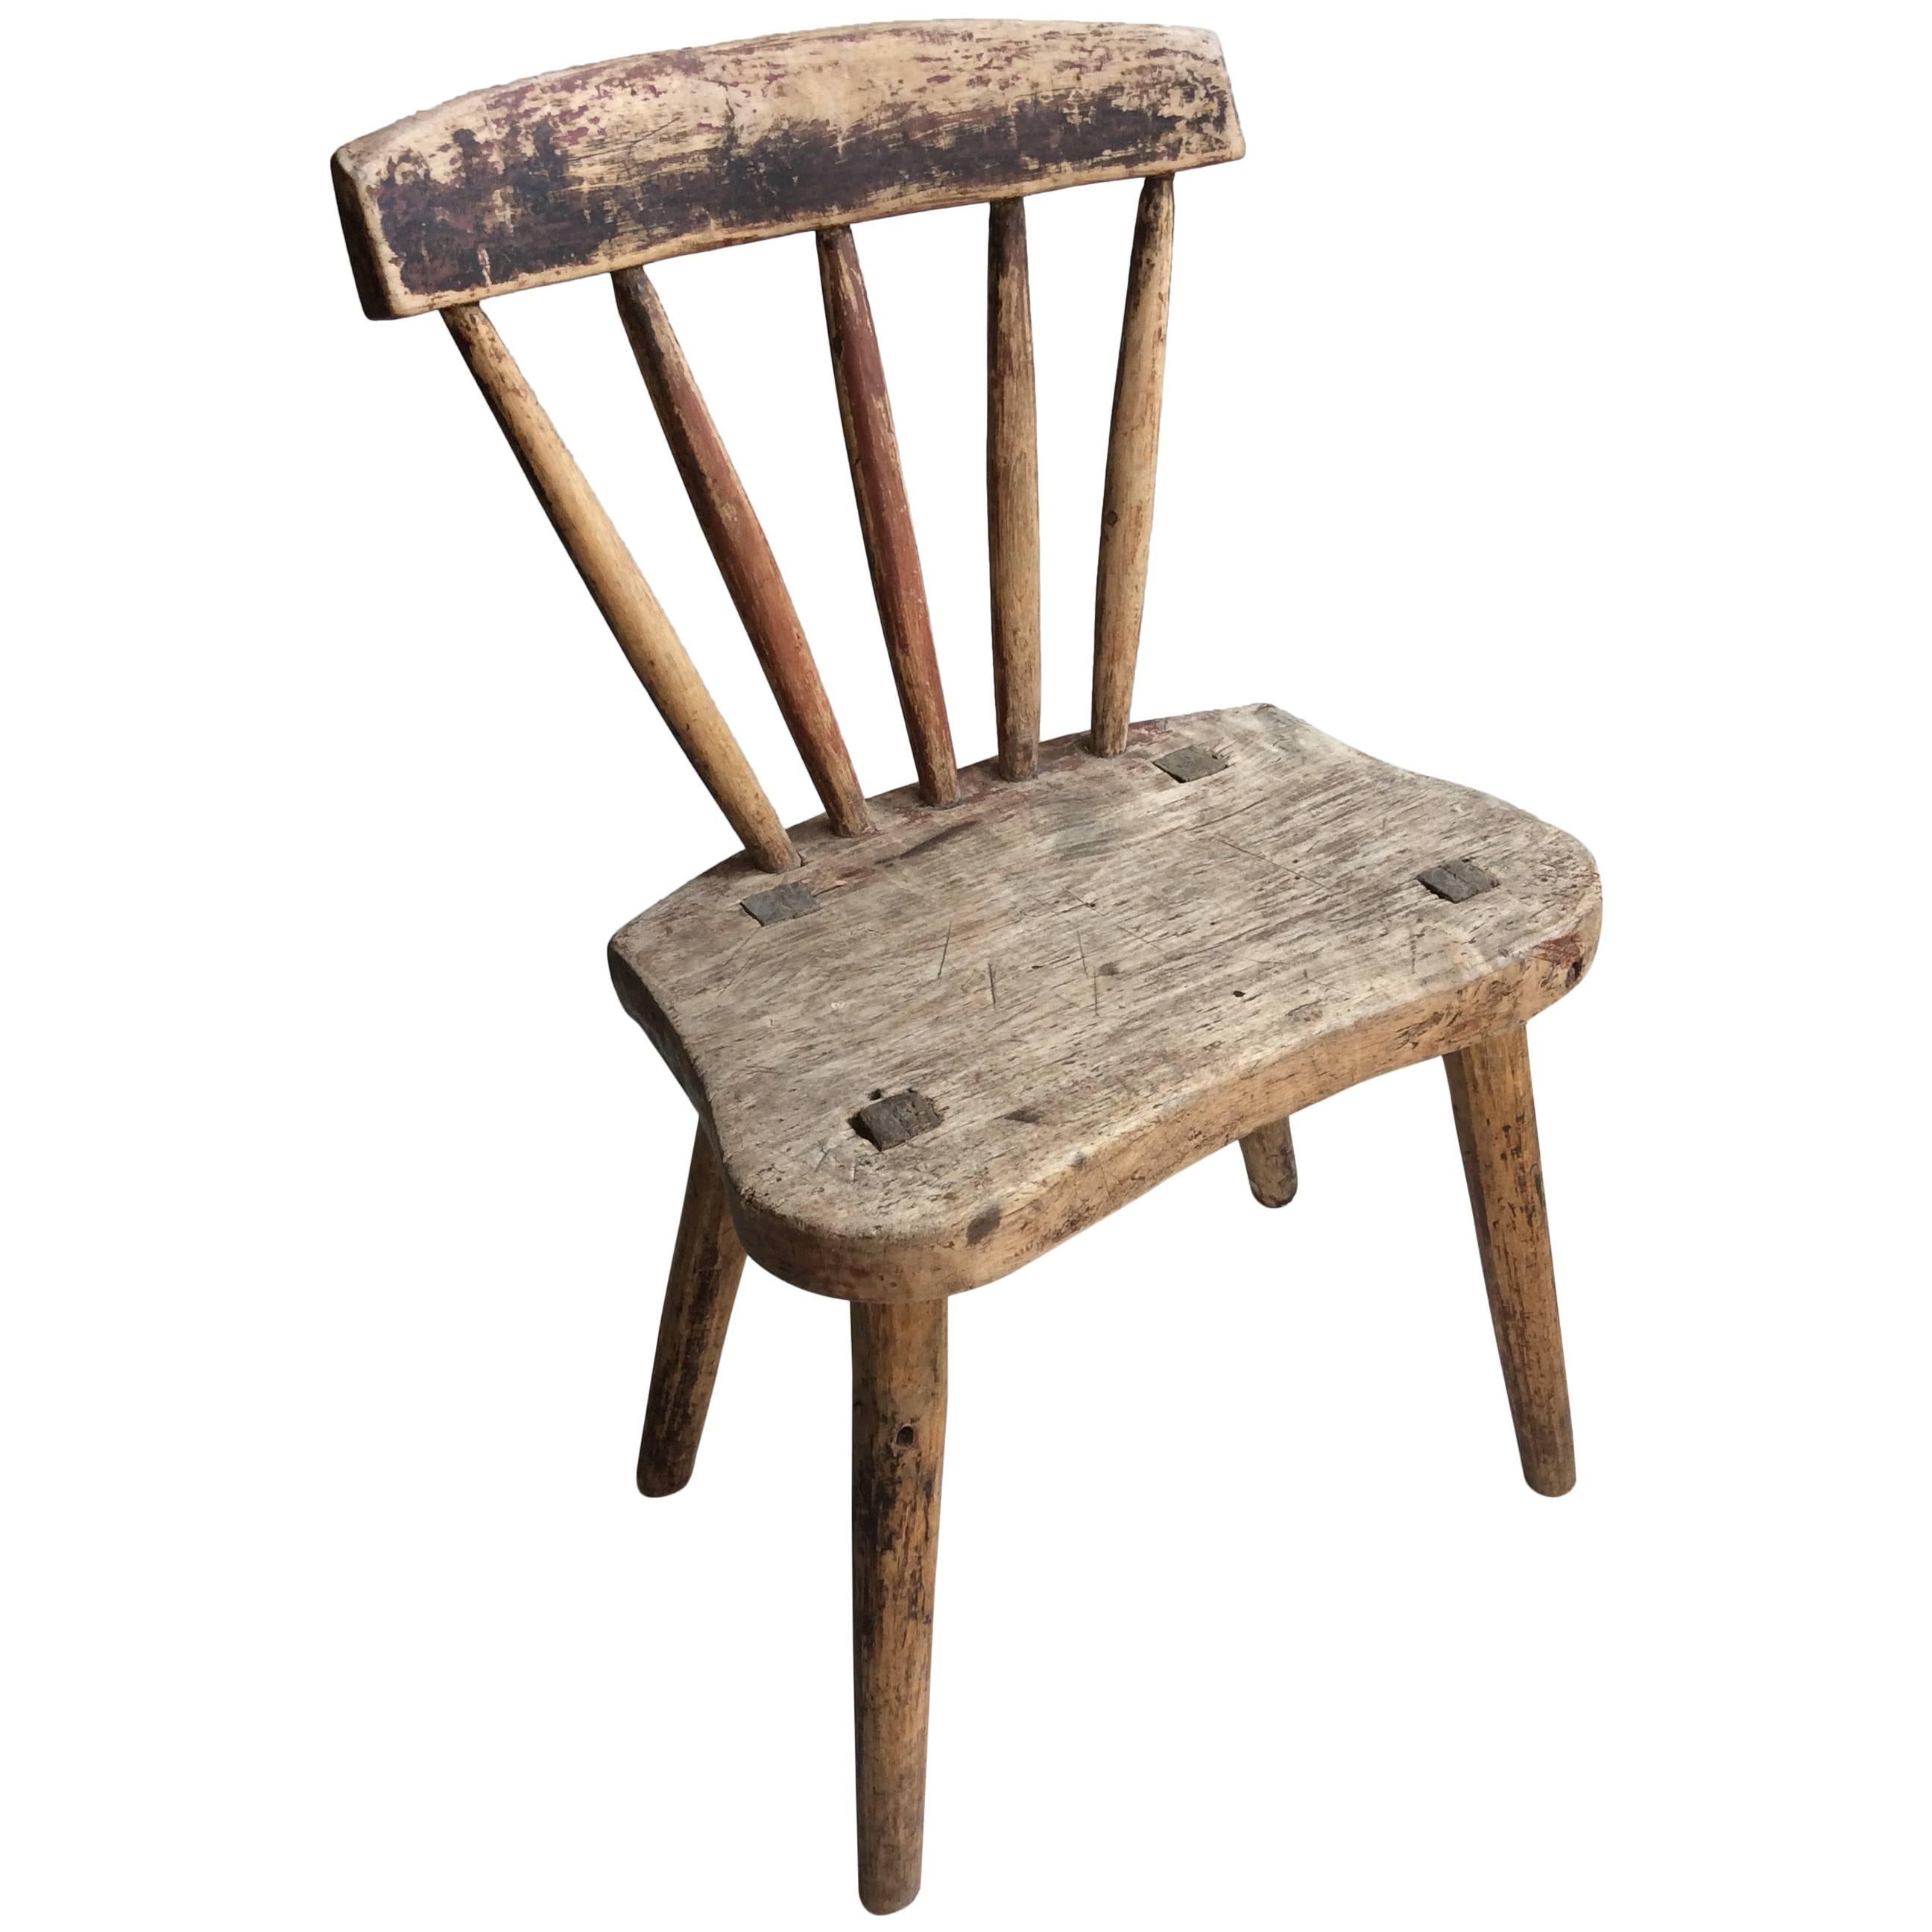 Primitive Swedish Wooden Chair from Dalarna For Sale